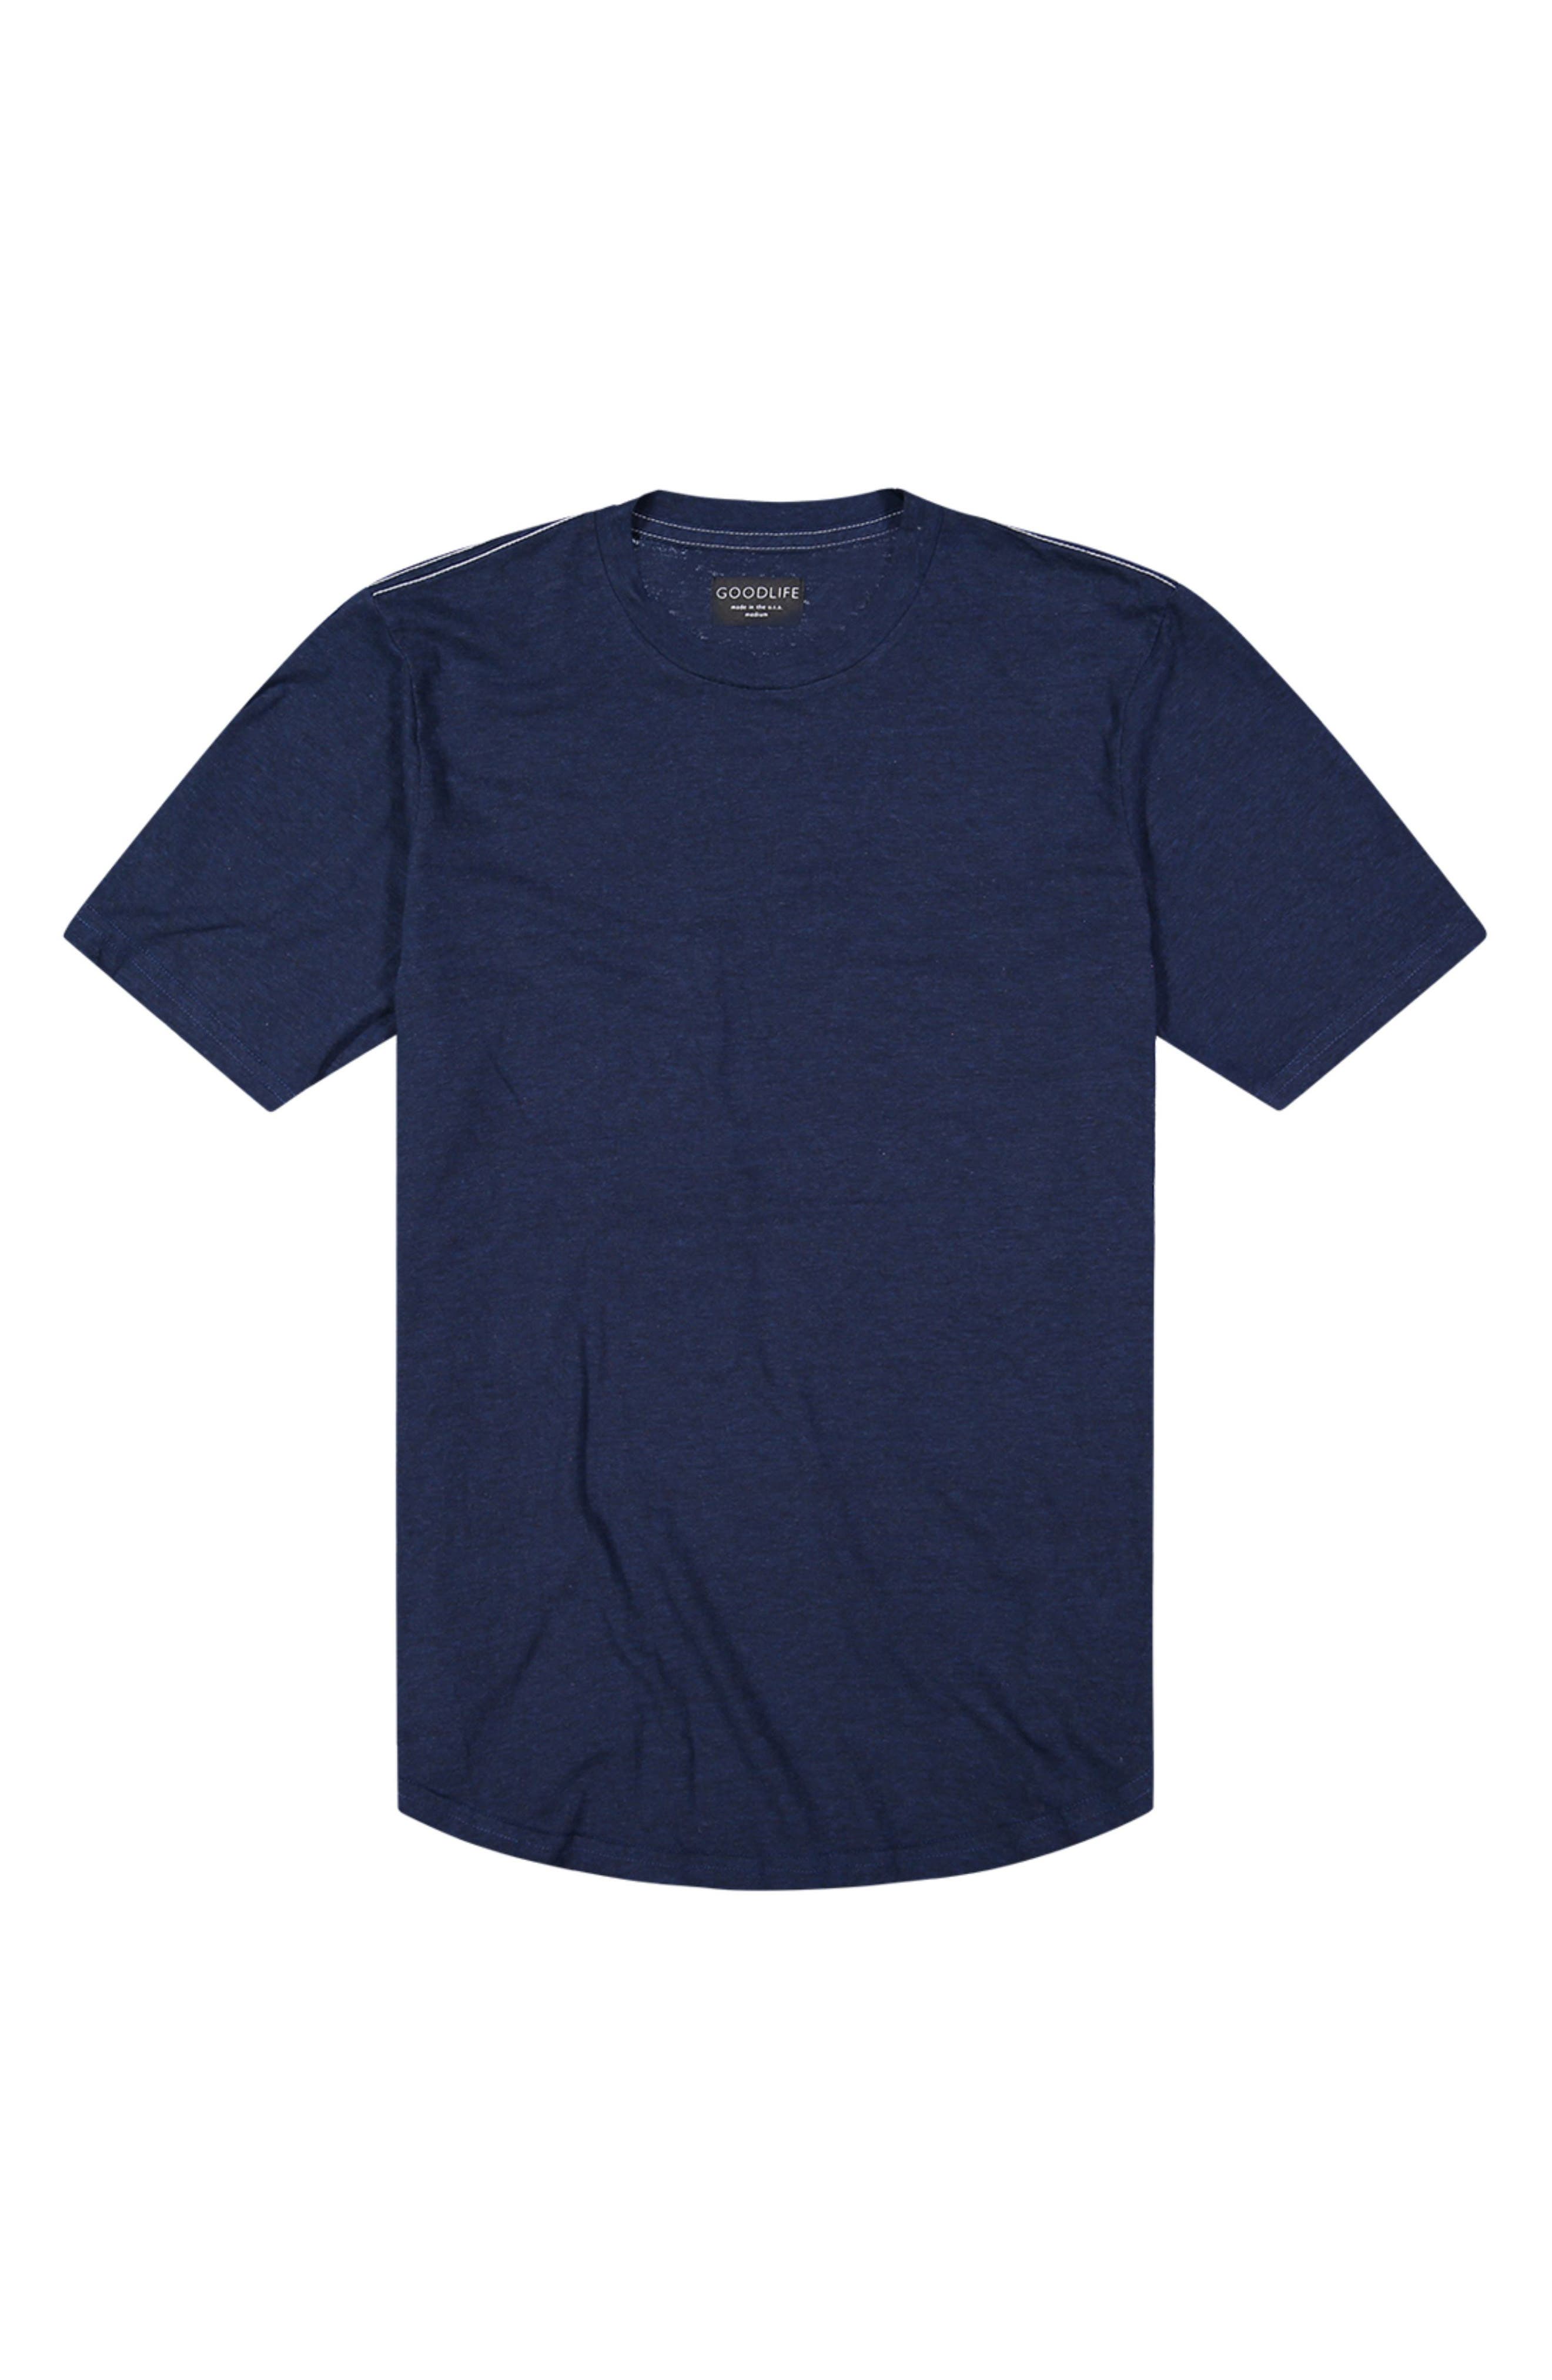 Goodlife Scallop T-shirt In  Navy